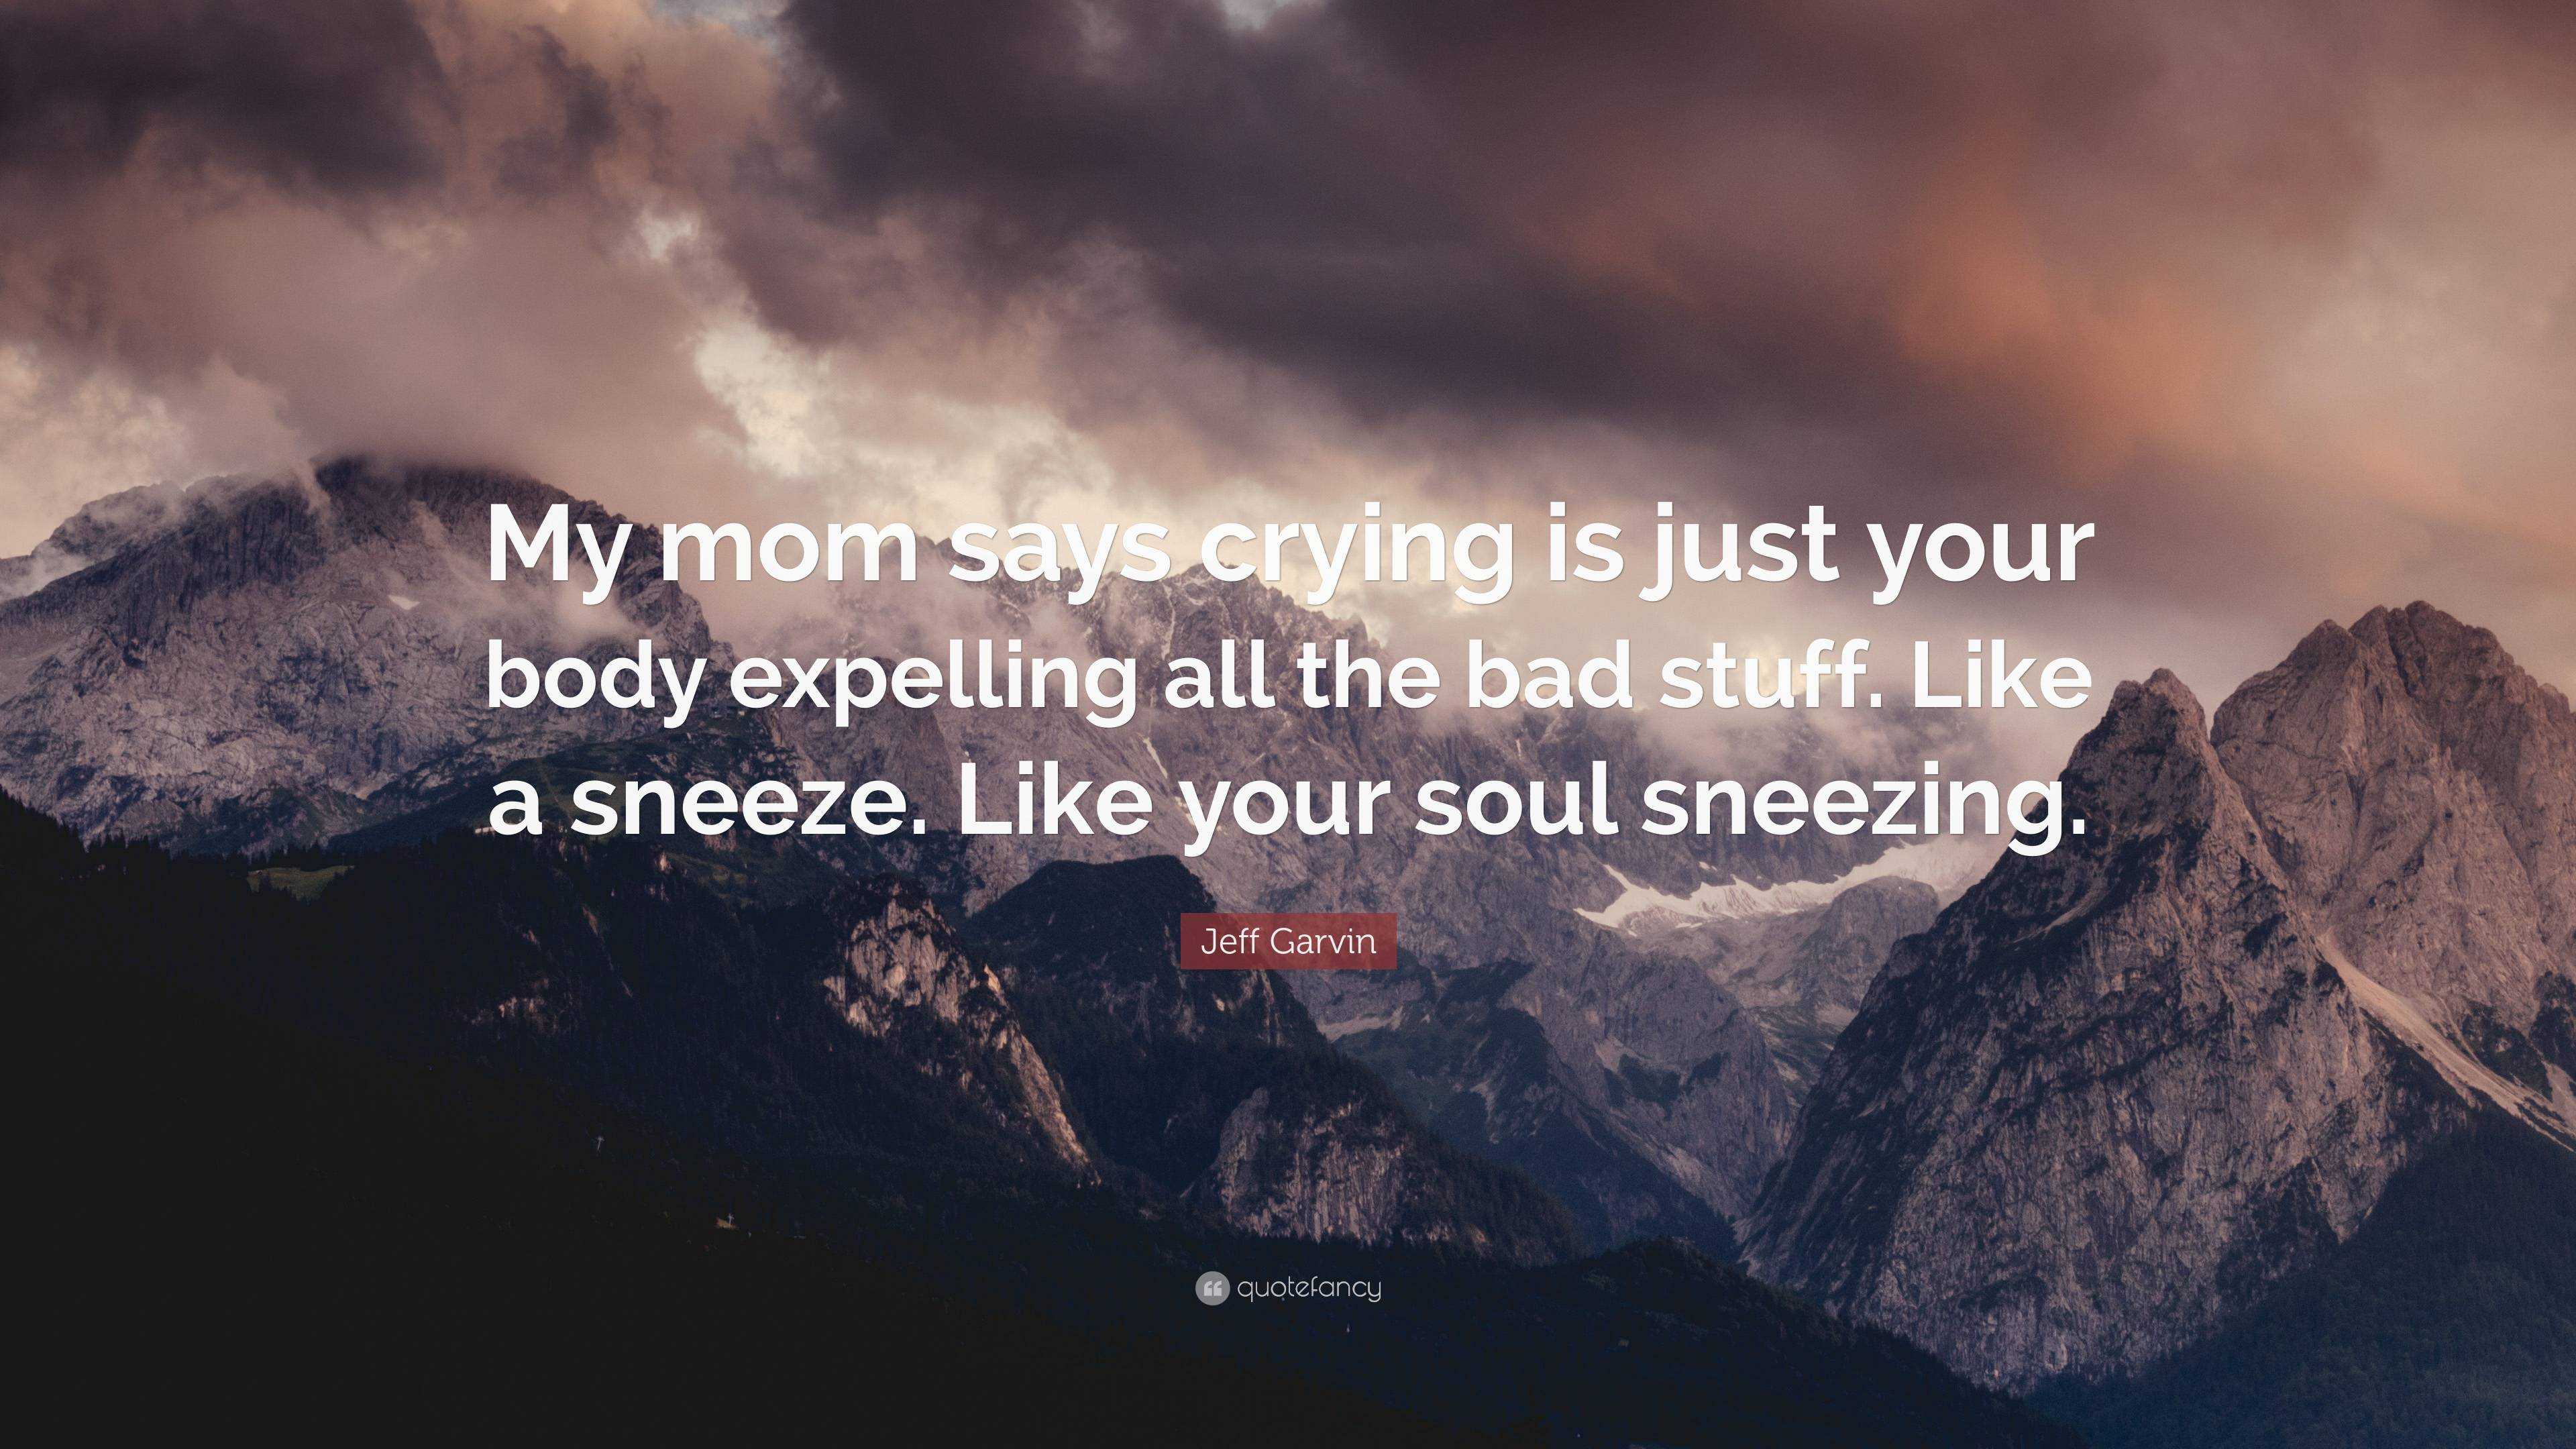 Jeff Garvin Quote: “My mom says crying is just your body expelling